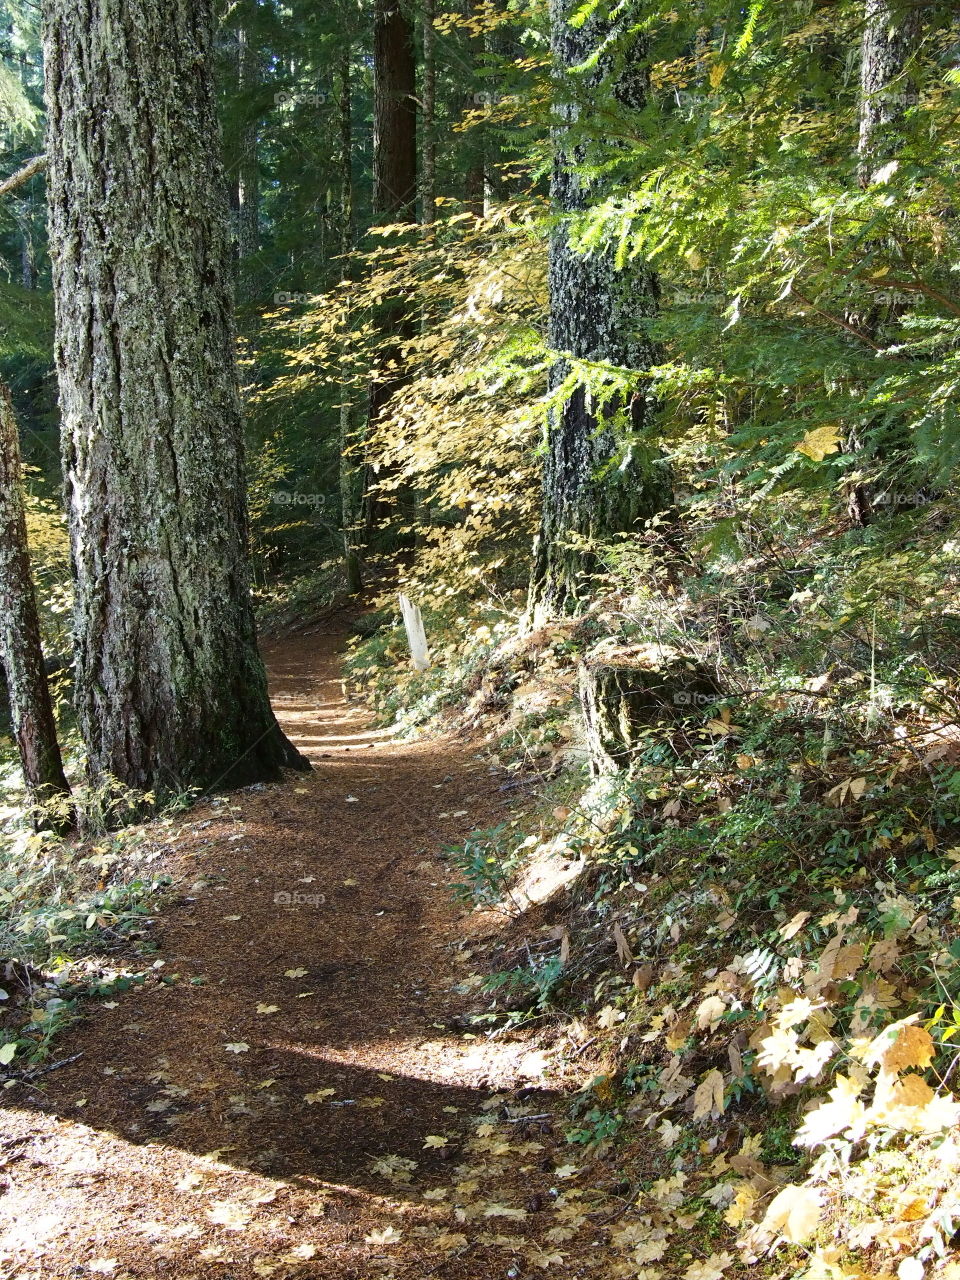 A peaceful path leads through the beautiful forests of Western Oregon on a warm and sunny fall day.